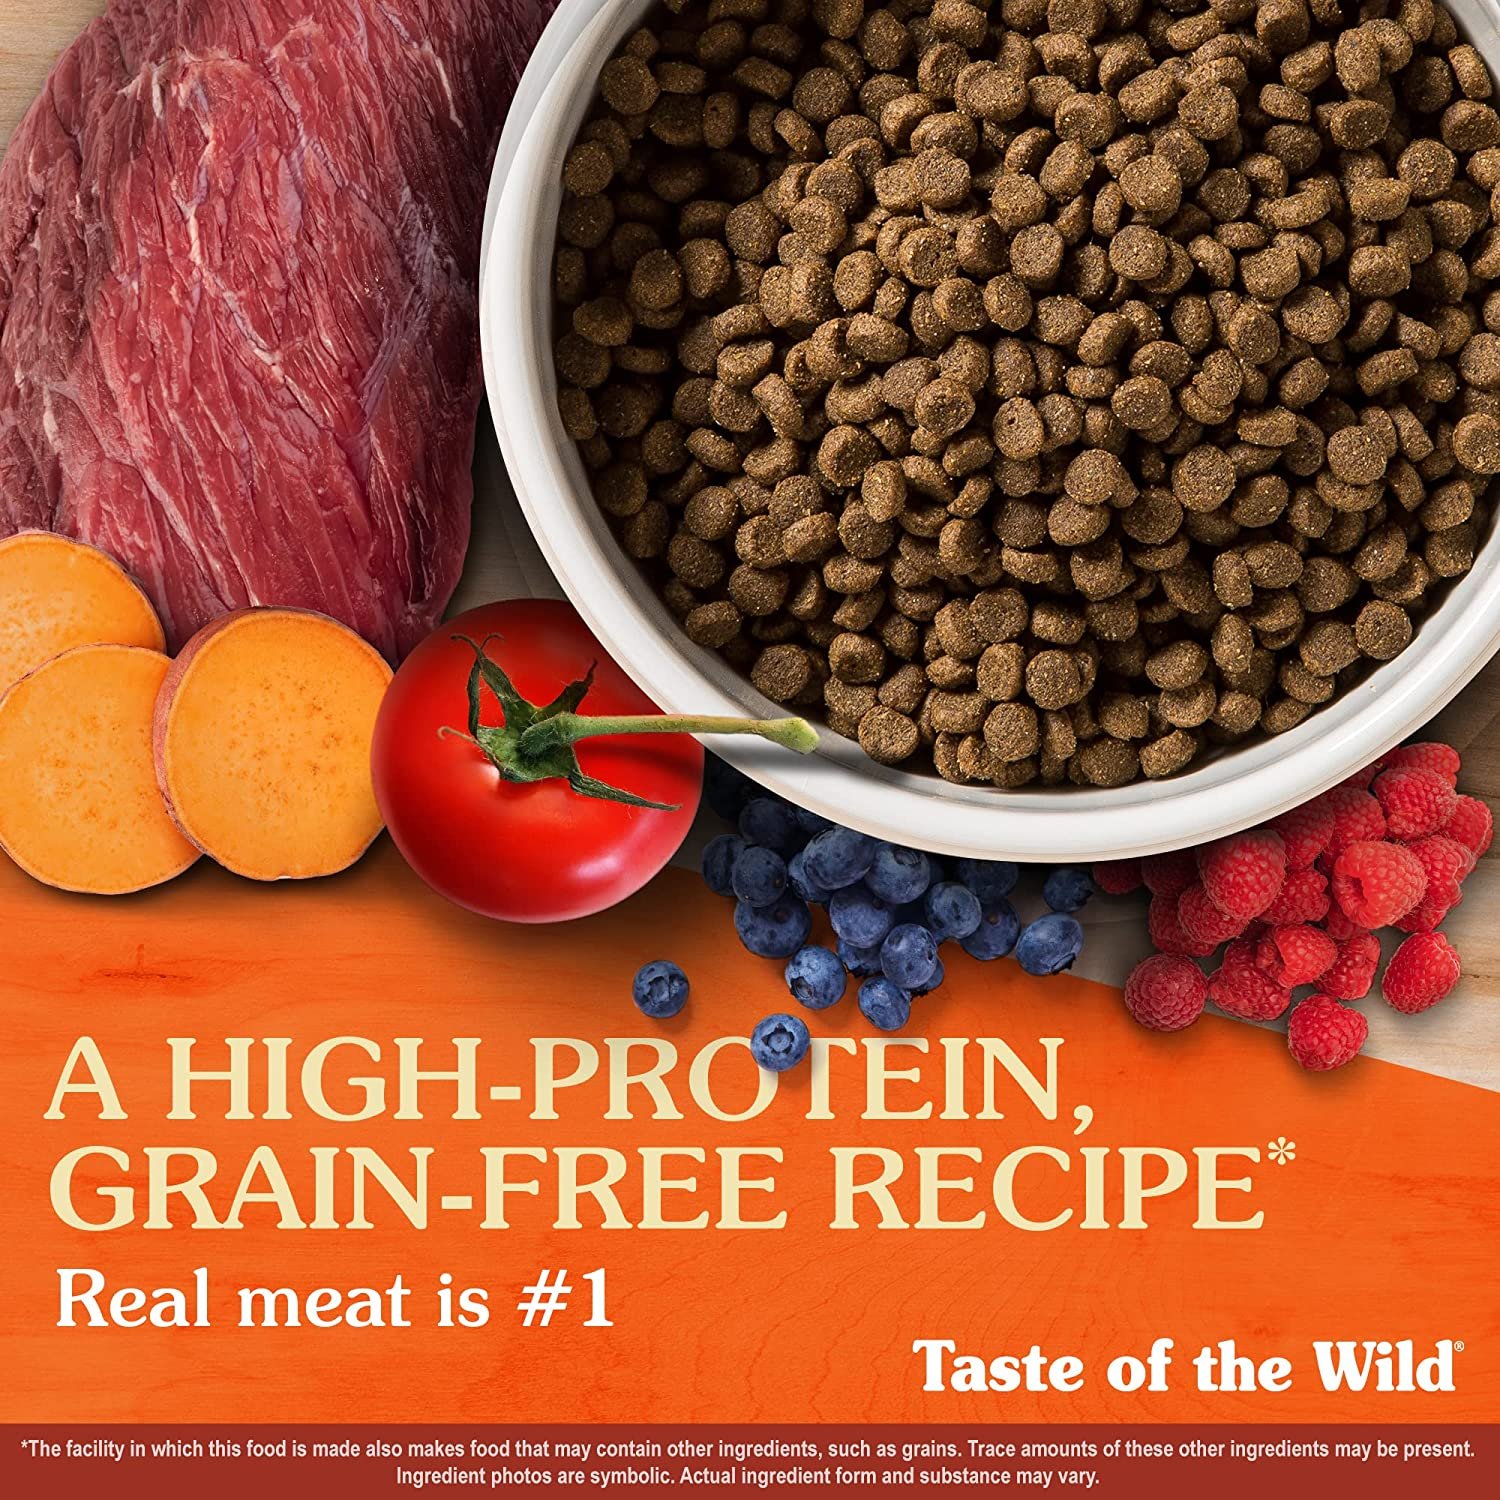 Taste of the Wild Dry Dog Food with Roasted Bison and Venison (Copy) (Copy) (Copy) (Copy)